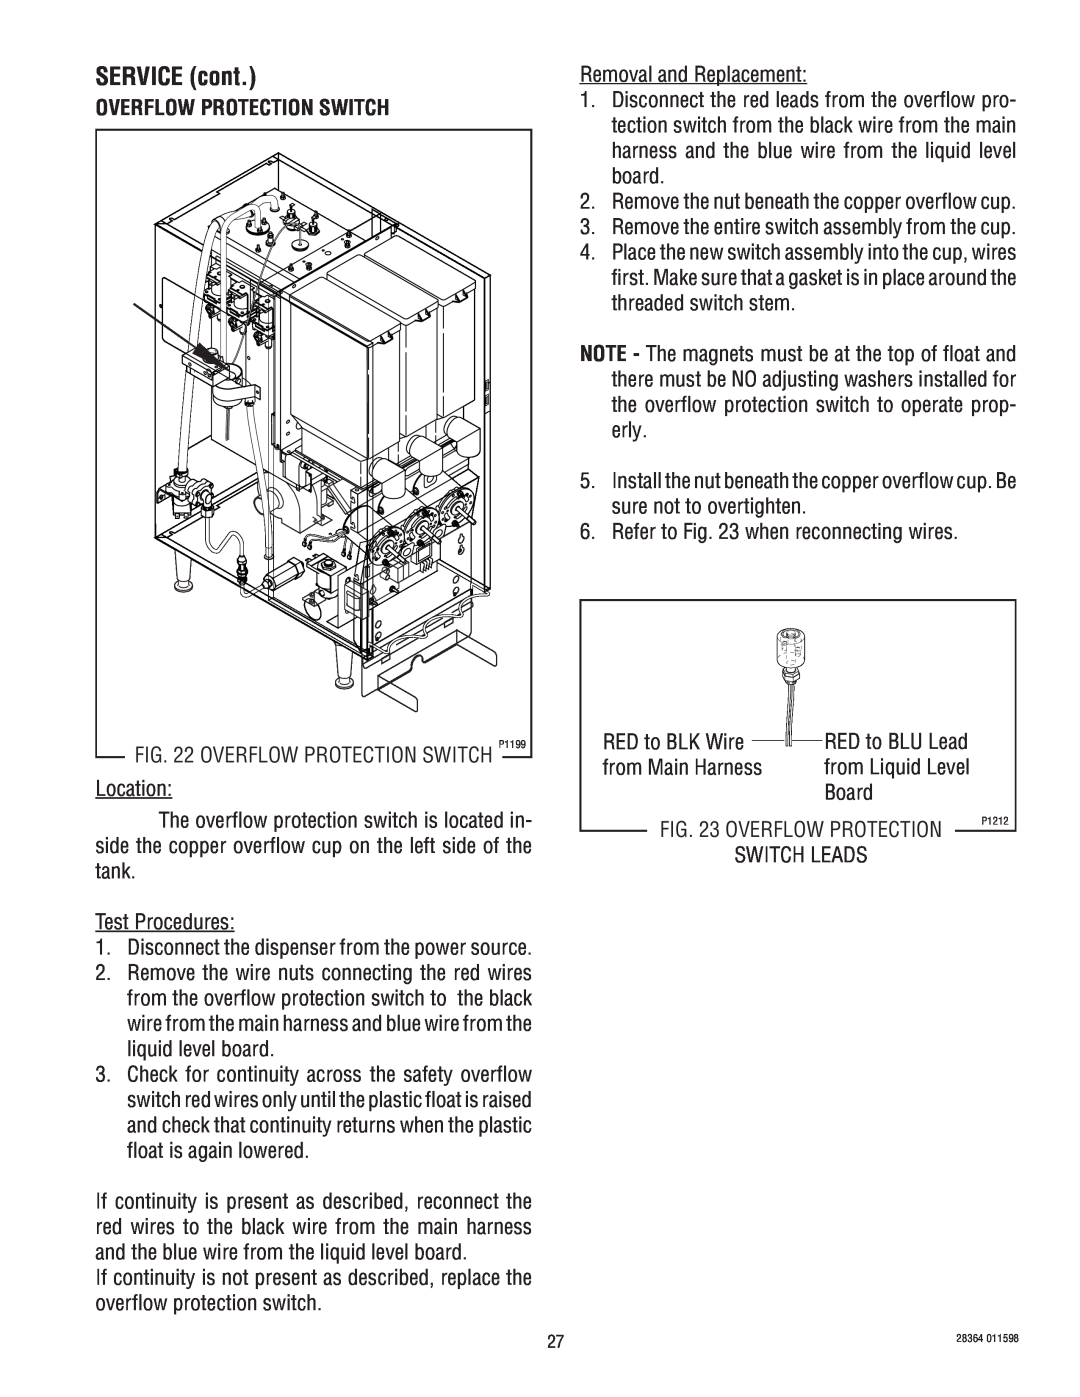 Bunn FMD-3 service manual Overflow Protection Switch, SERVICE cont 